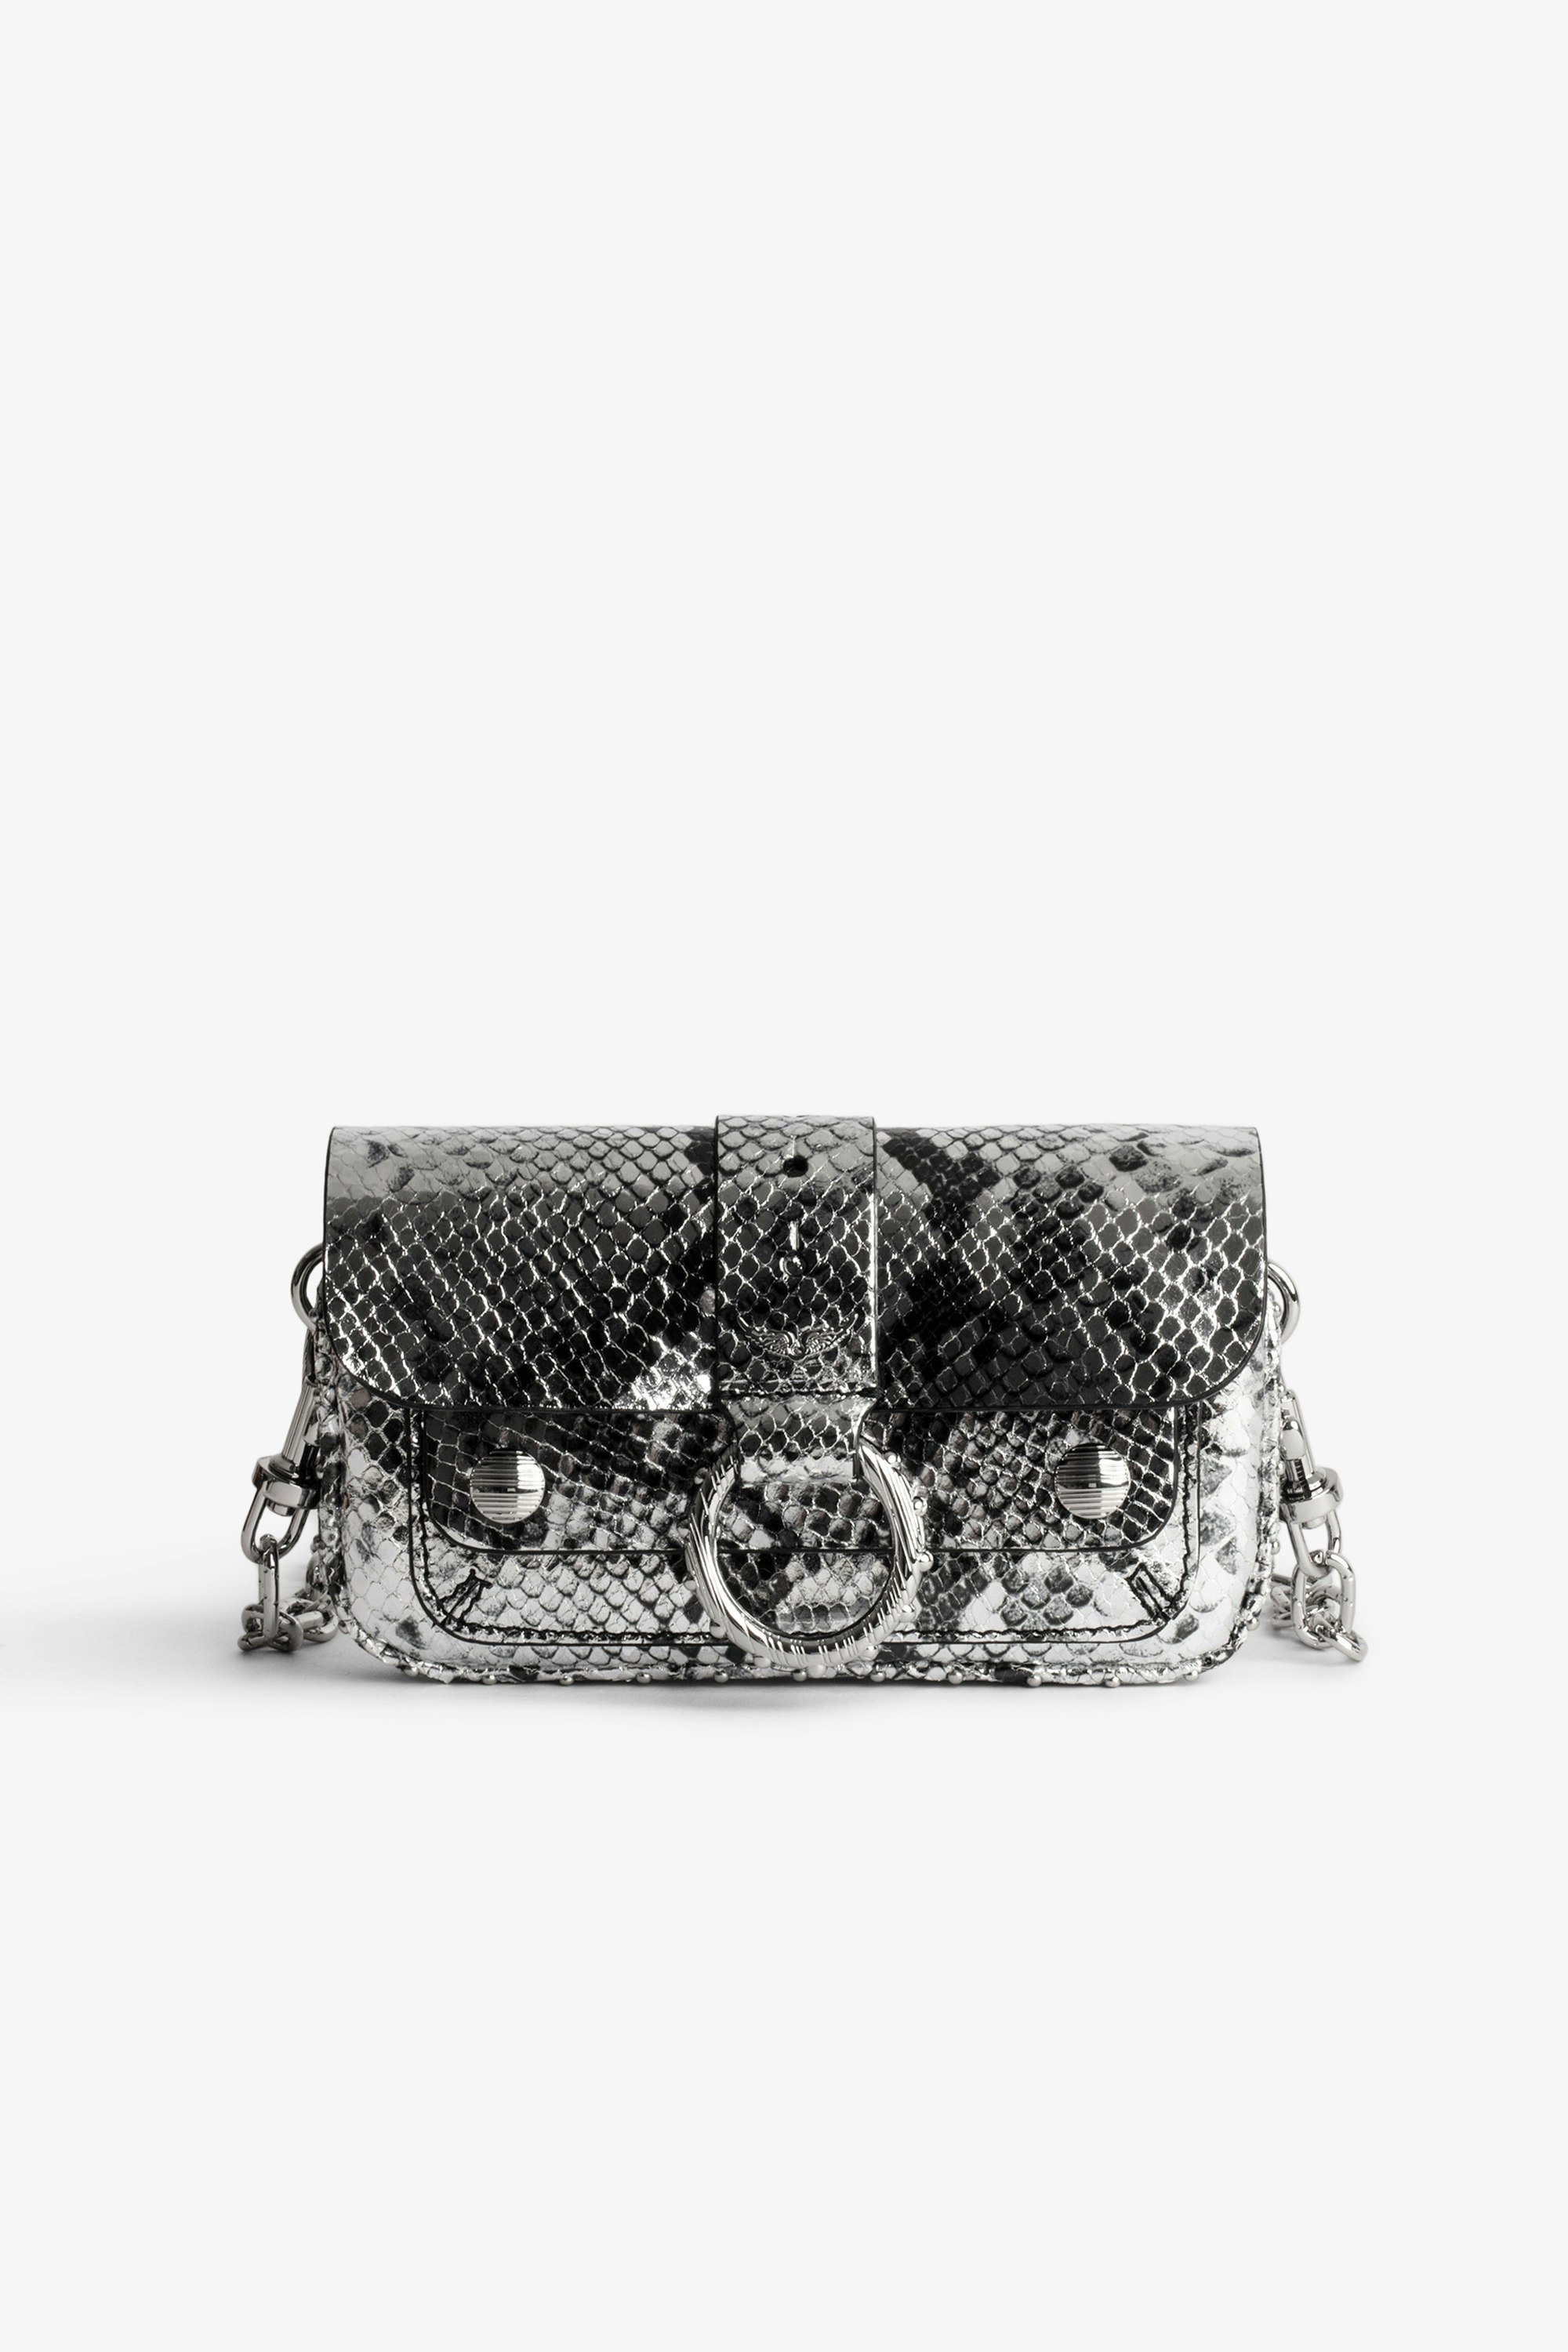 Kate Wallet Bag Women’s silver metallic snake-embossed leather bag with a shoulder strap and flap